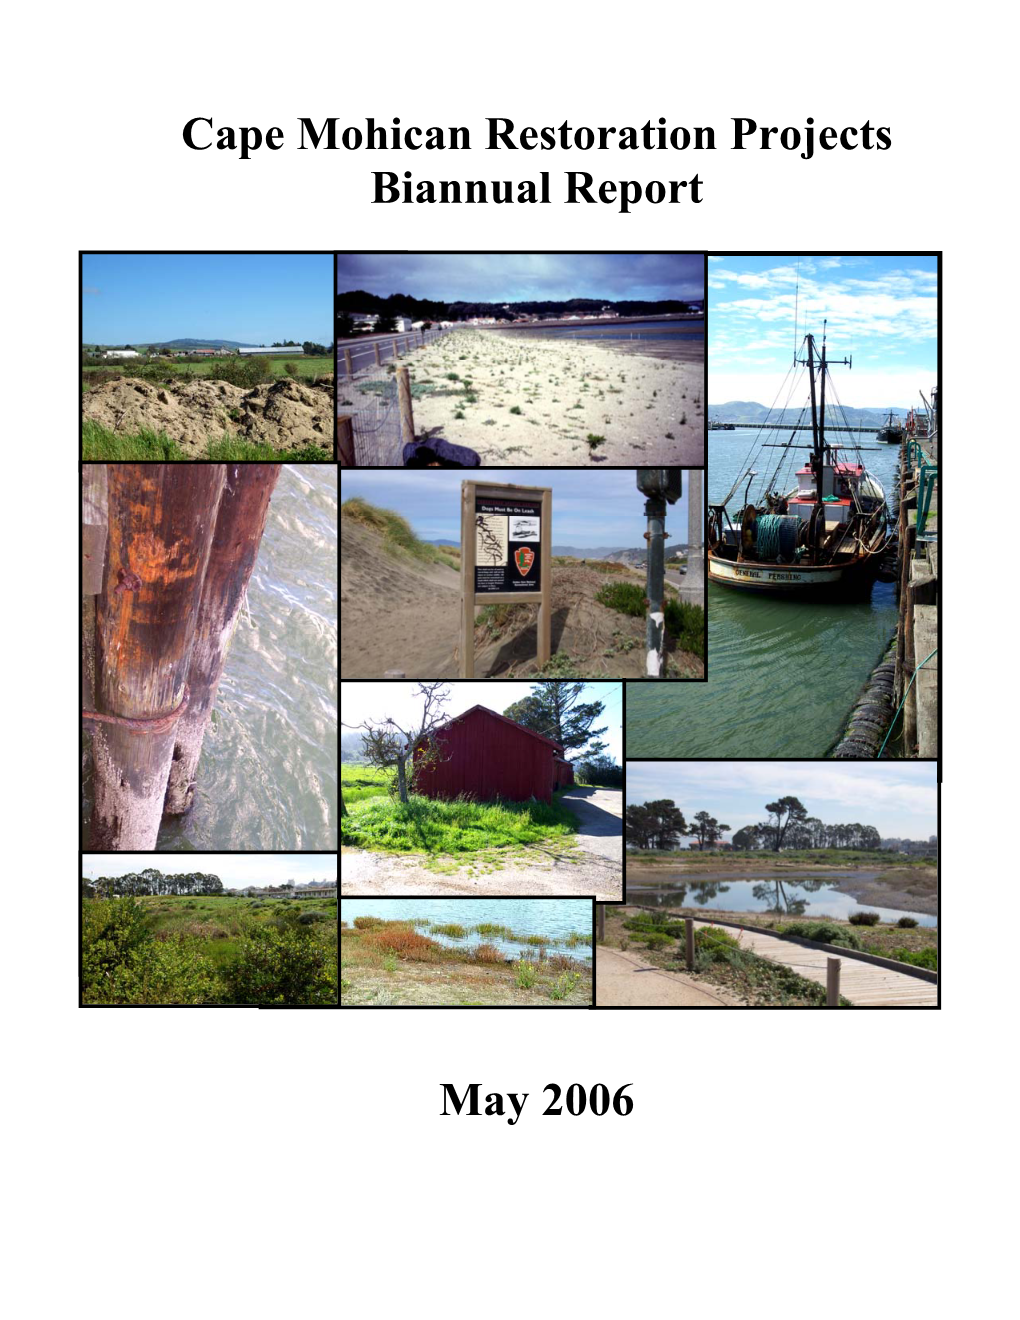 Cape Mohican Restoration Projects Biannual Report